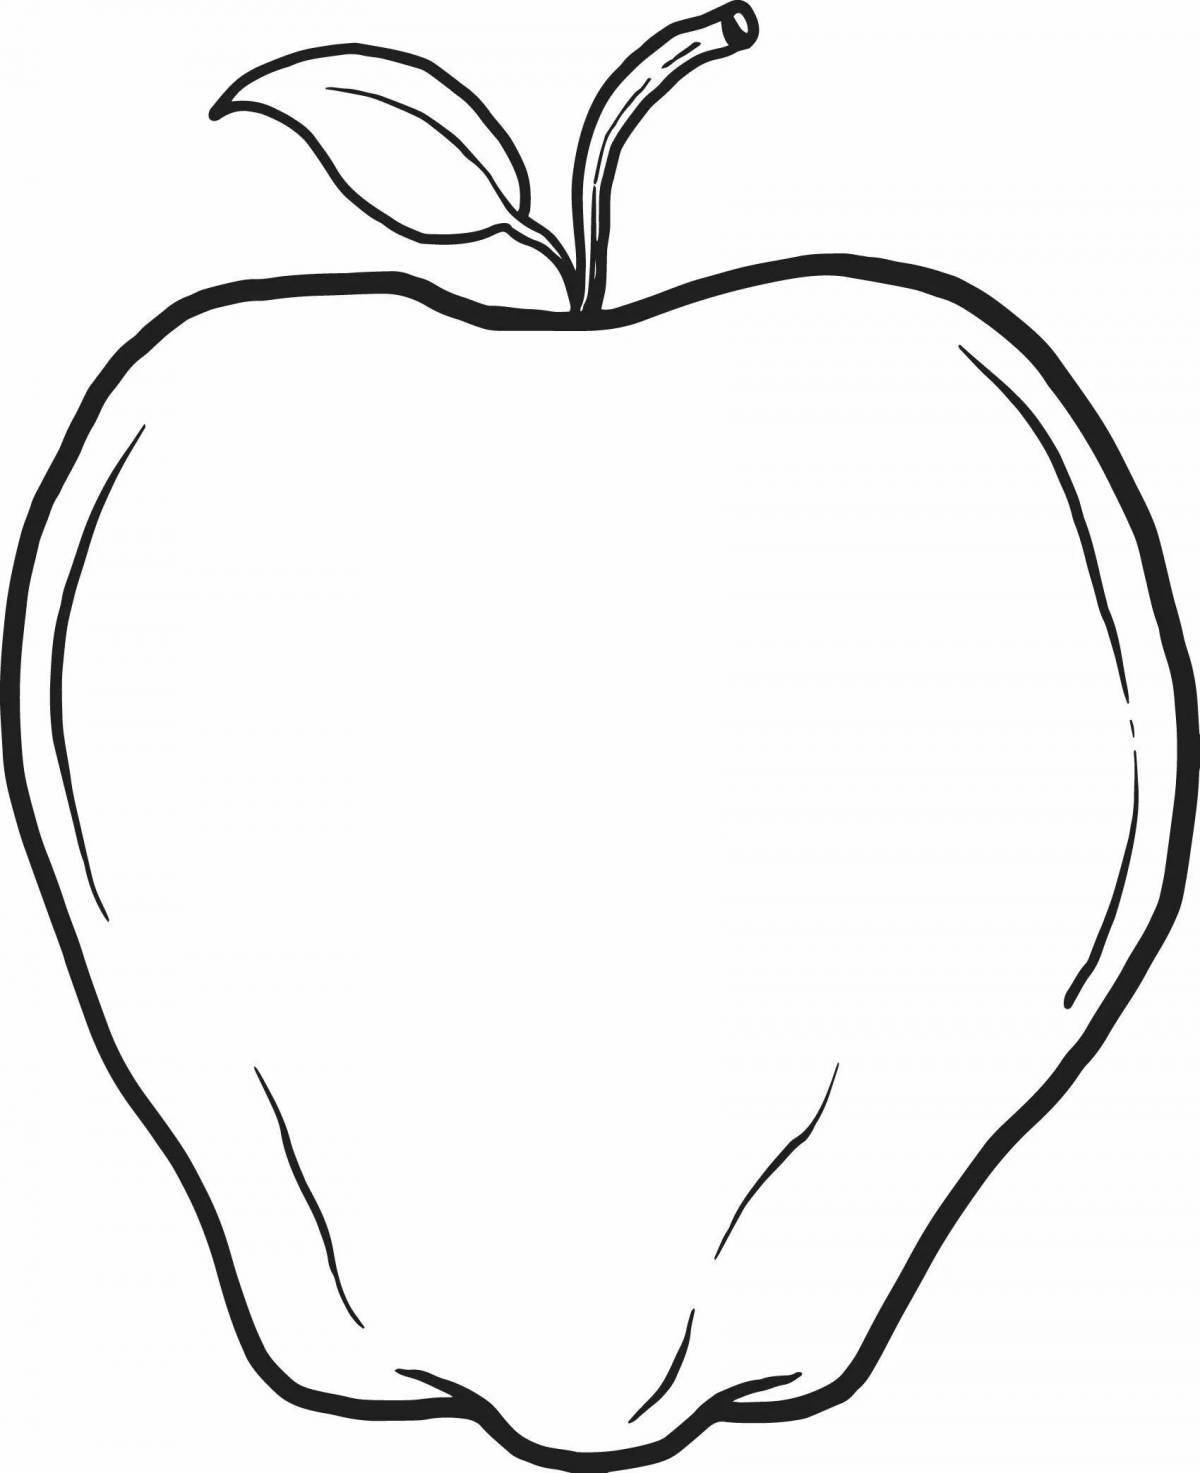 Intriguing apple pattern coloring page